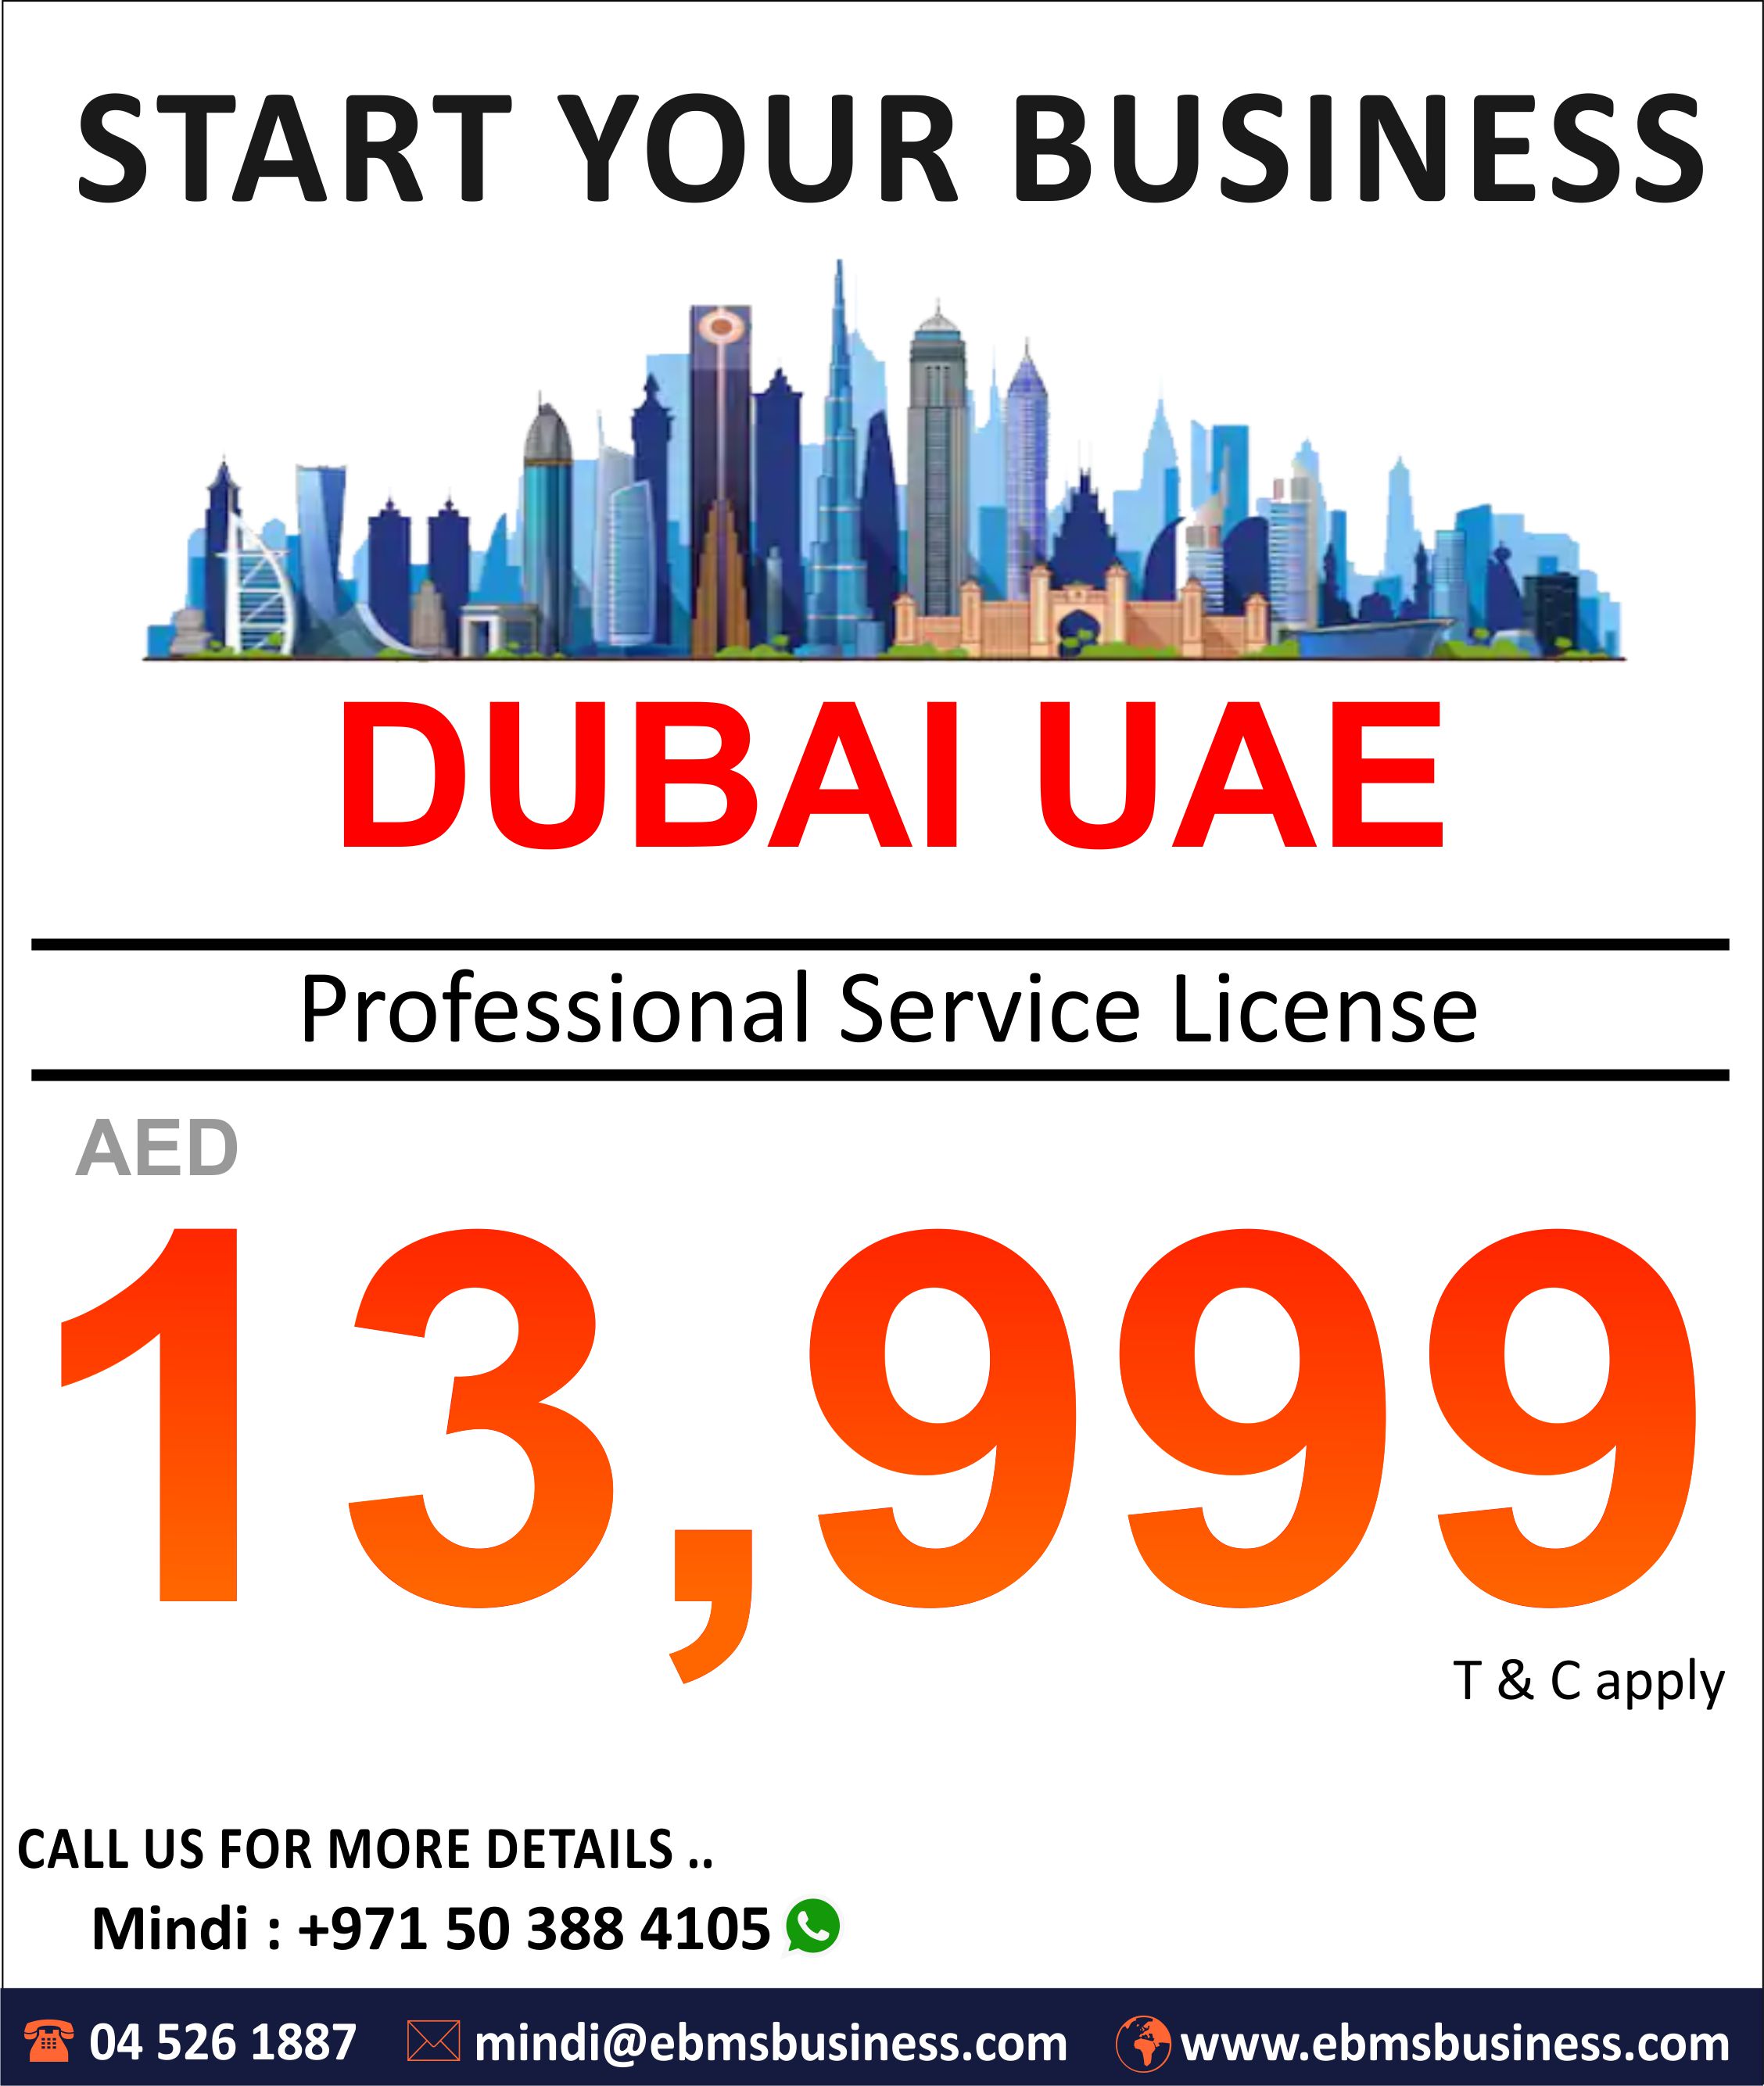 Start Your Business in Mainland in UAE just for AED 13,999